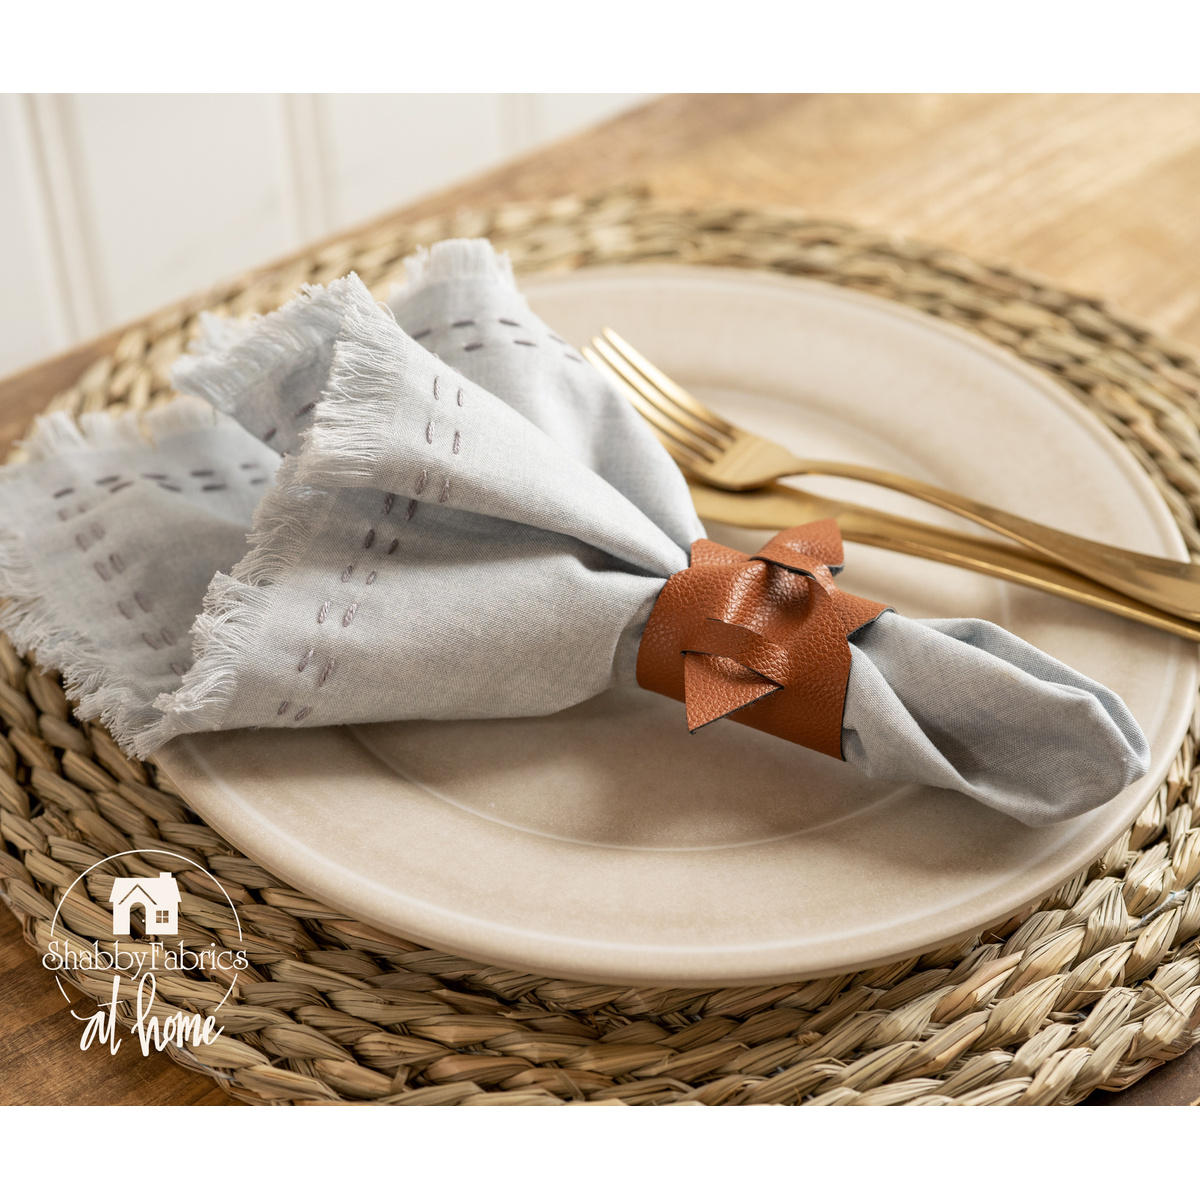 Fabric Flower Napkin Rings: Elegant Table Settings with Scraps - Nancy's  Notions